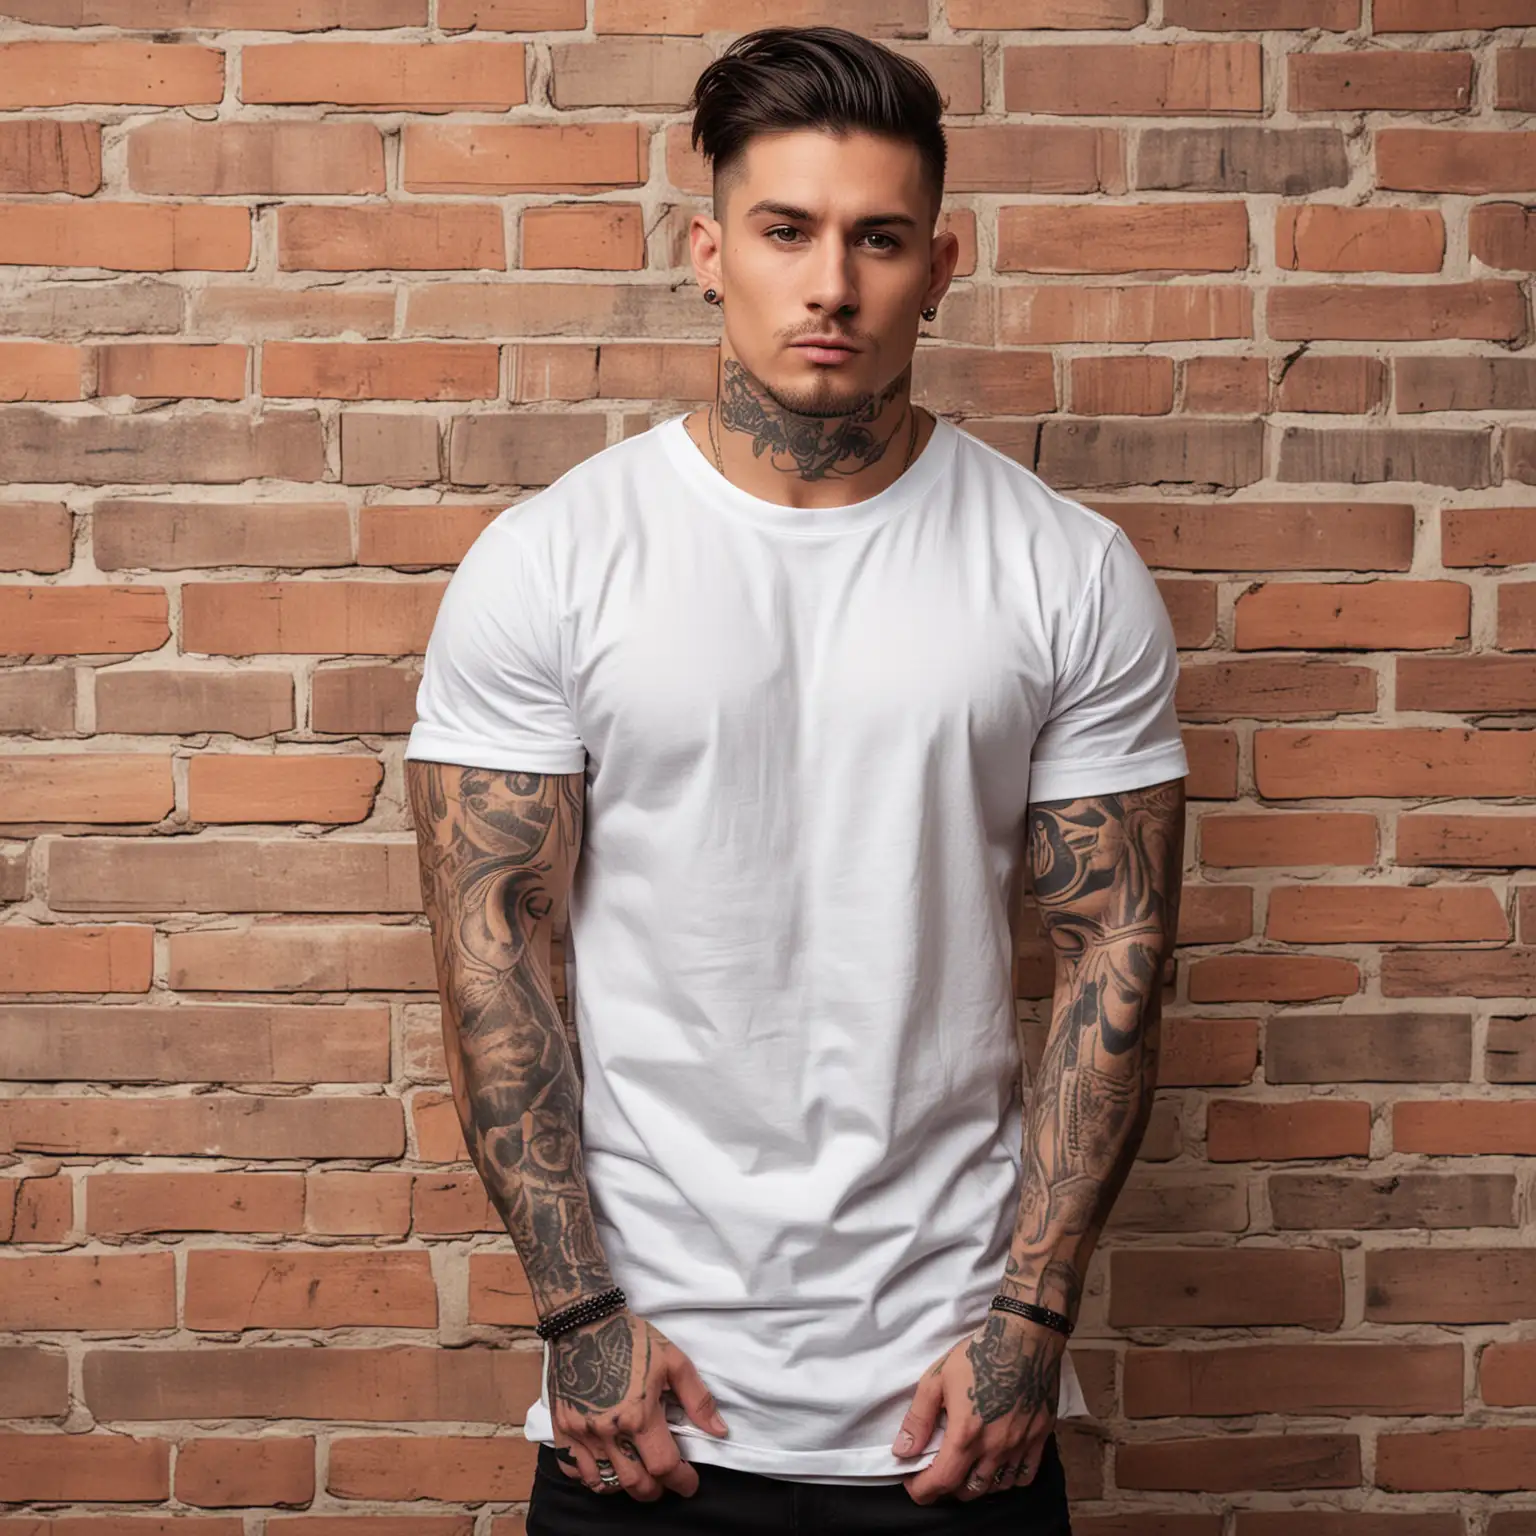 Muscular Tattooed Model in White Oversized TShirt Against Brick Wall Background